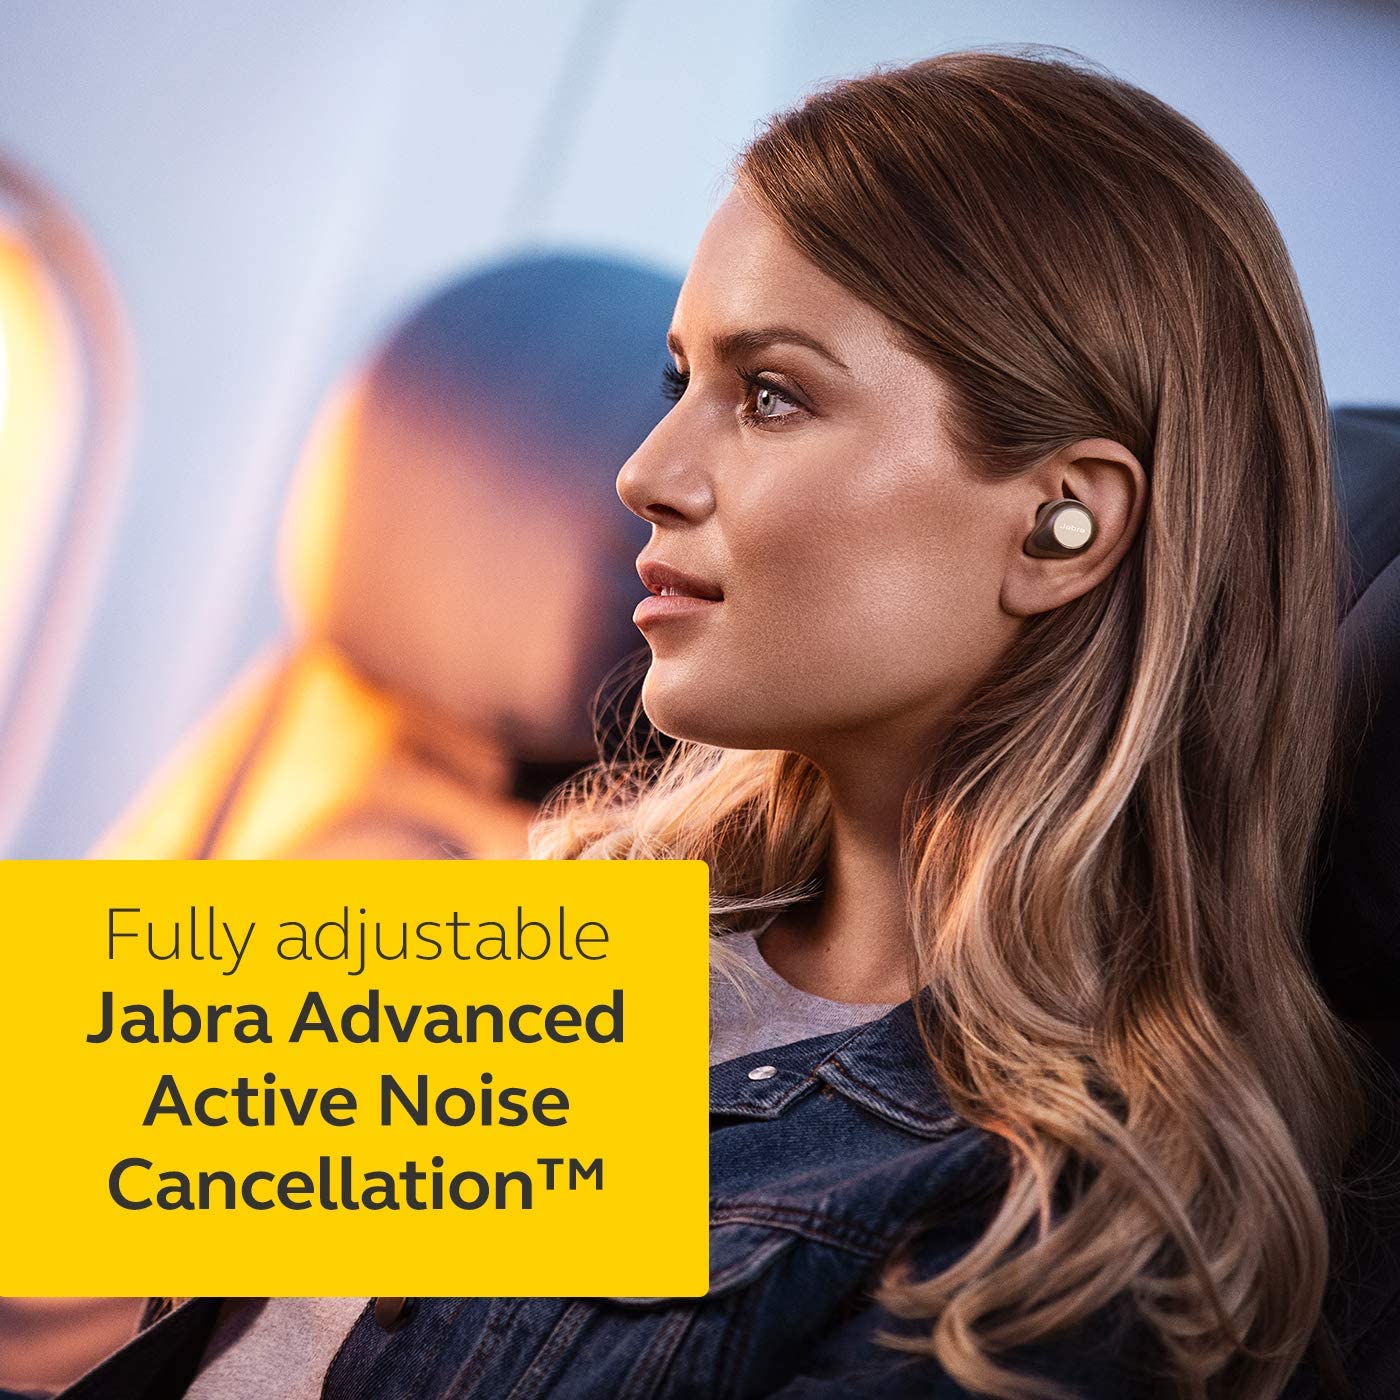 Jabra Elite 85t True Wireless Earbuds - Jabra Advanced Active Noise Cancellation with Long Battery Life, Powerful Speakers and Alexa Built-in - Wireless Charging Case - Gold beige